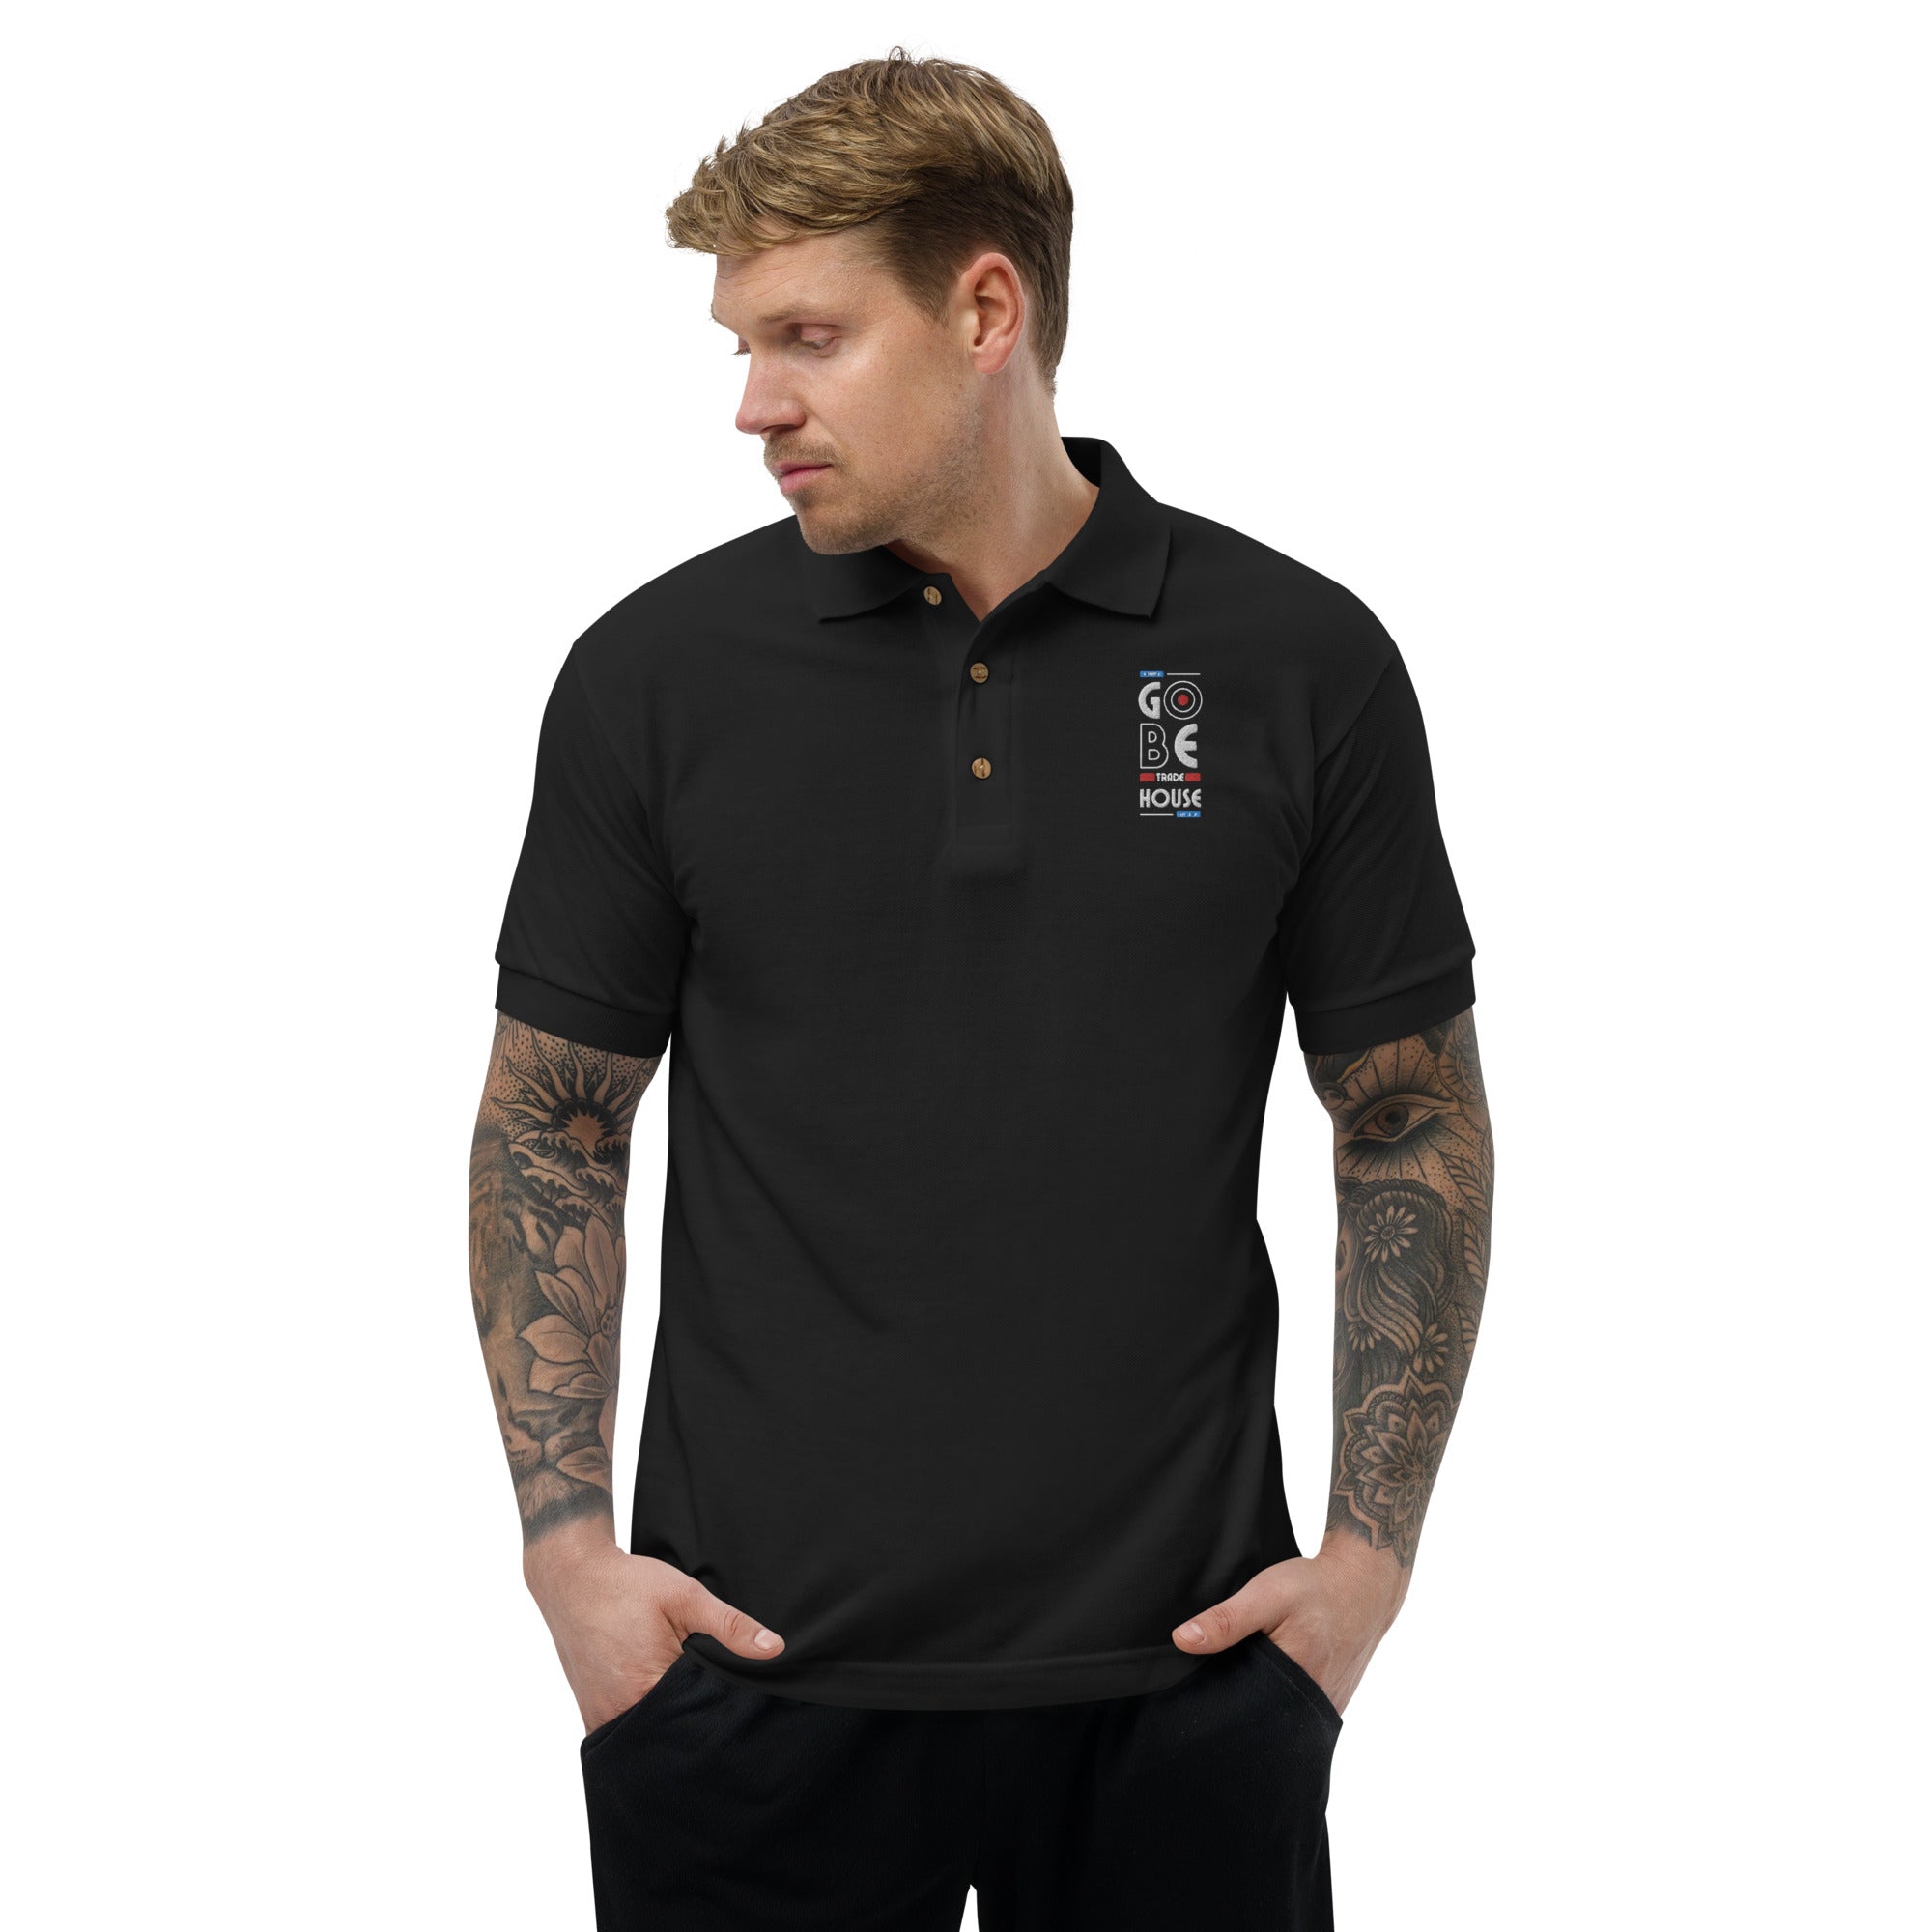 GO BE TRADEHOUSE Embroidered Polo Shirt